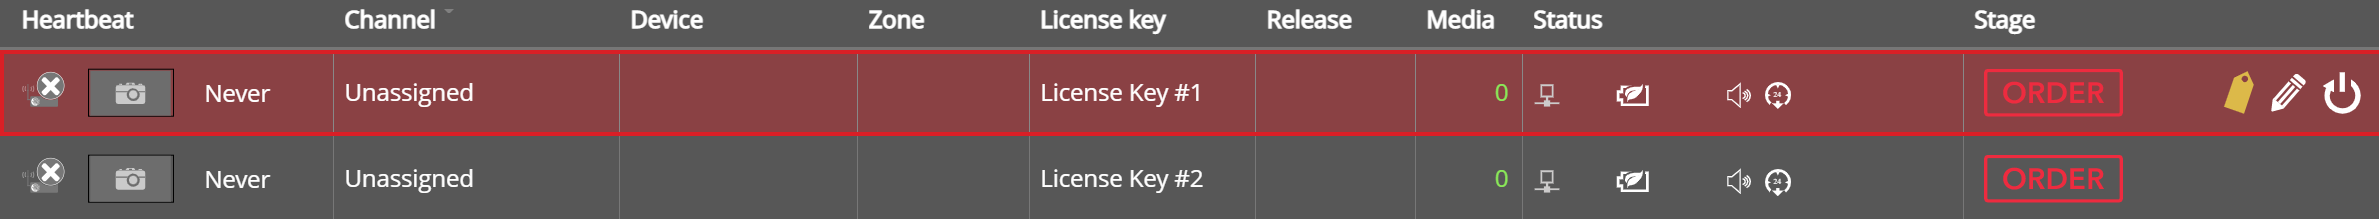 License Key #1 is ready to relocate